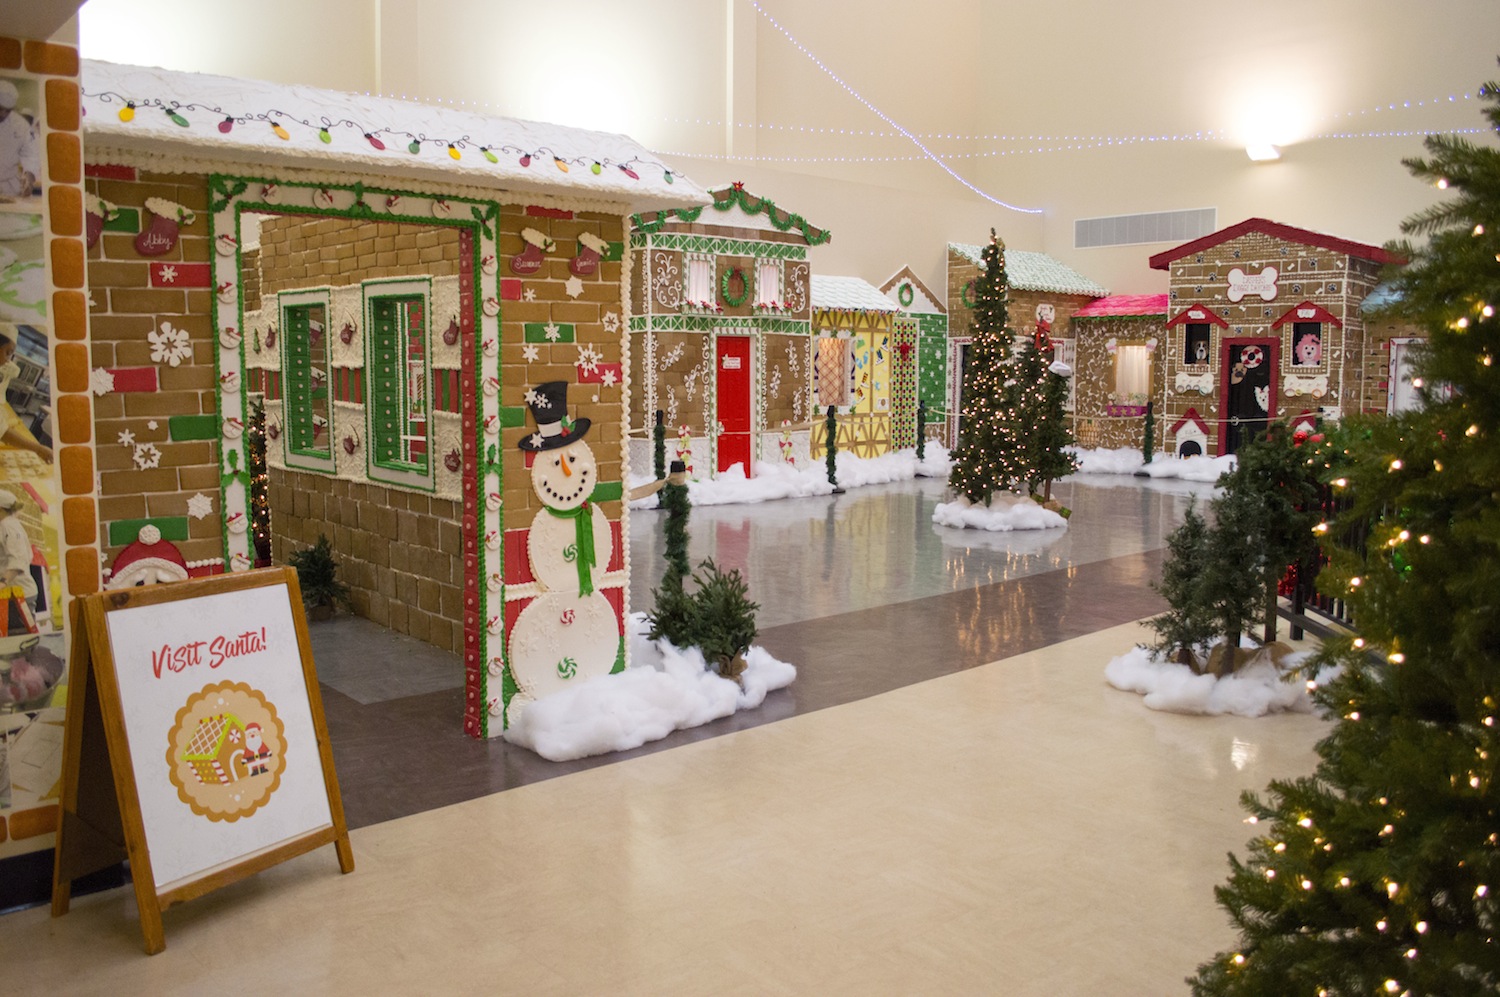 Life-sized gingerbread village at the Niagara Falls Culinary Institute.